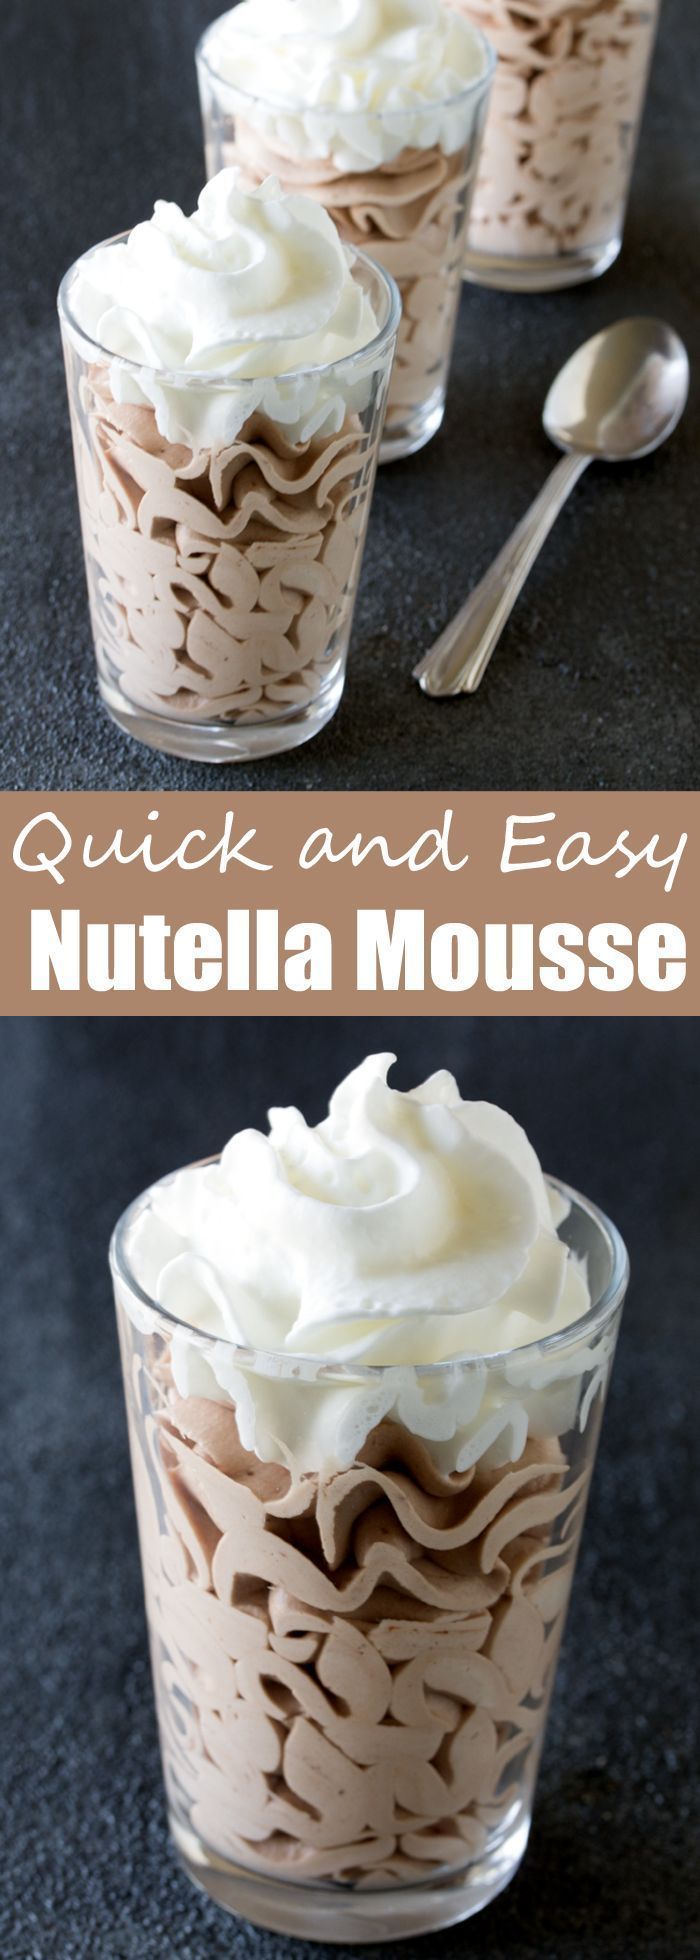 This 3 ingredient dessert will win you over immediately. Nutella Mousse is a quick